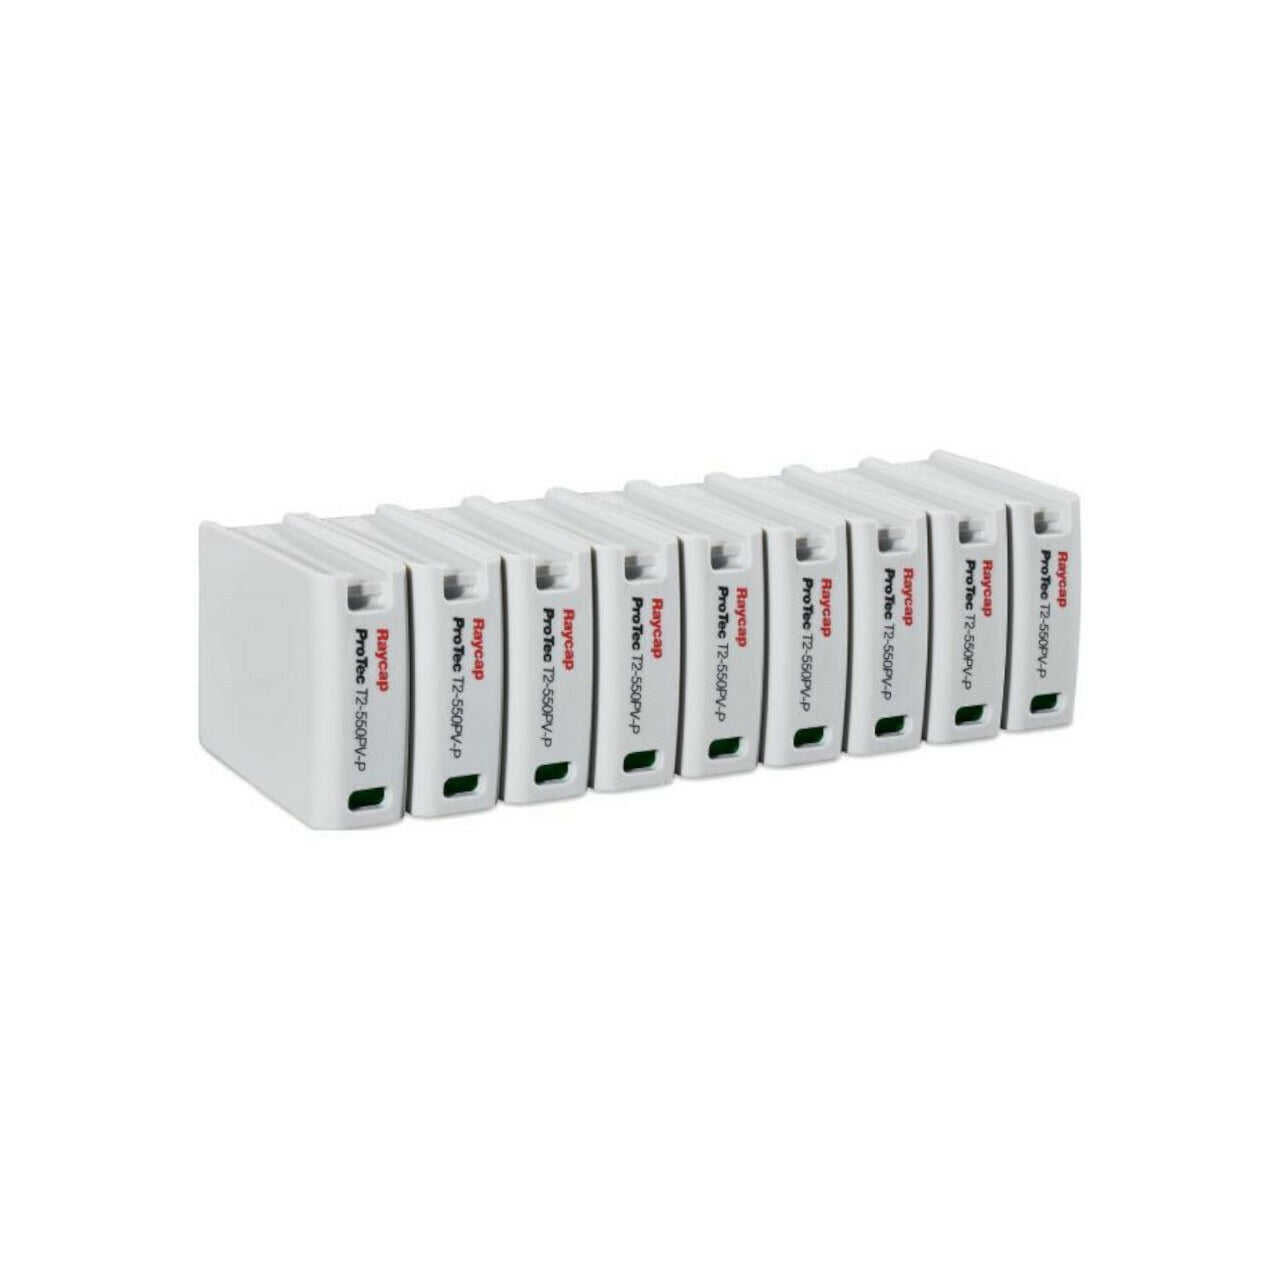 SMA | Core1 DC Surge Protection Kit (Type 1 + Type 2 OVP)｜2-4 Weeks Ship Time